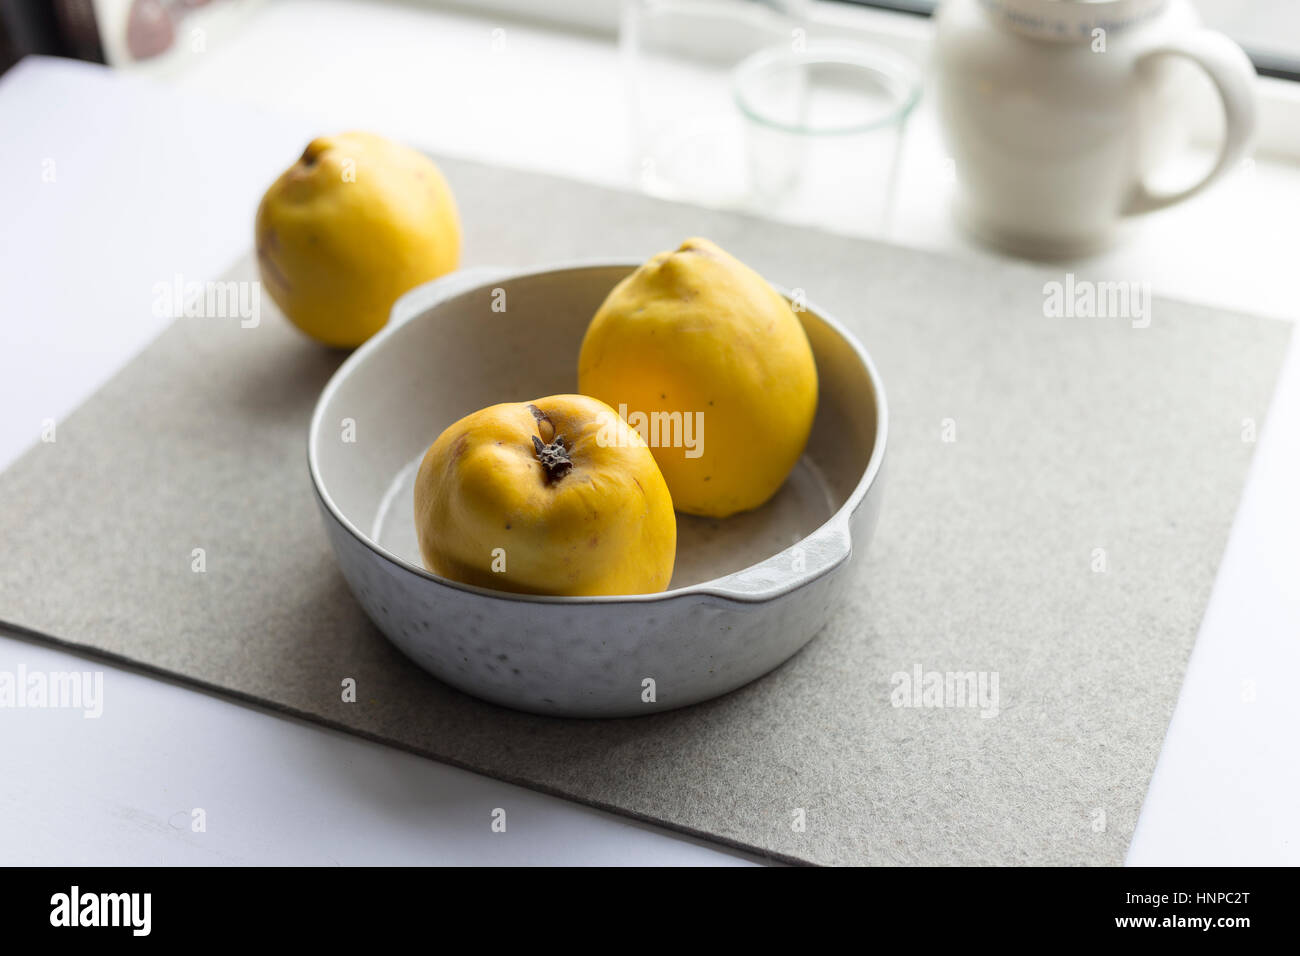 Bowl of quinces on table Stock Photo